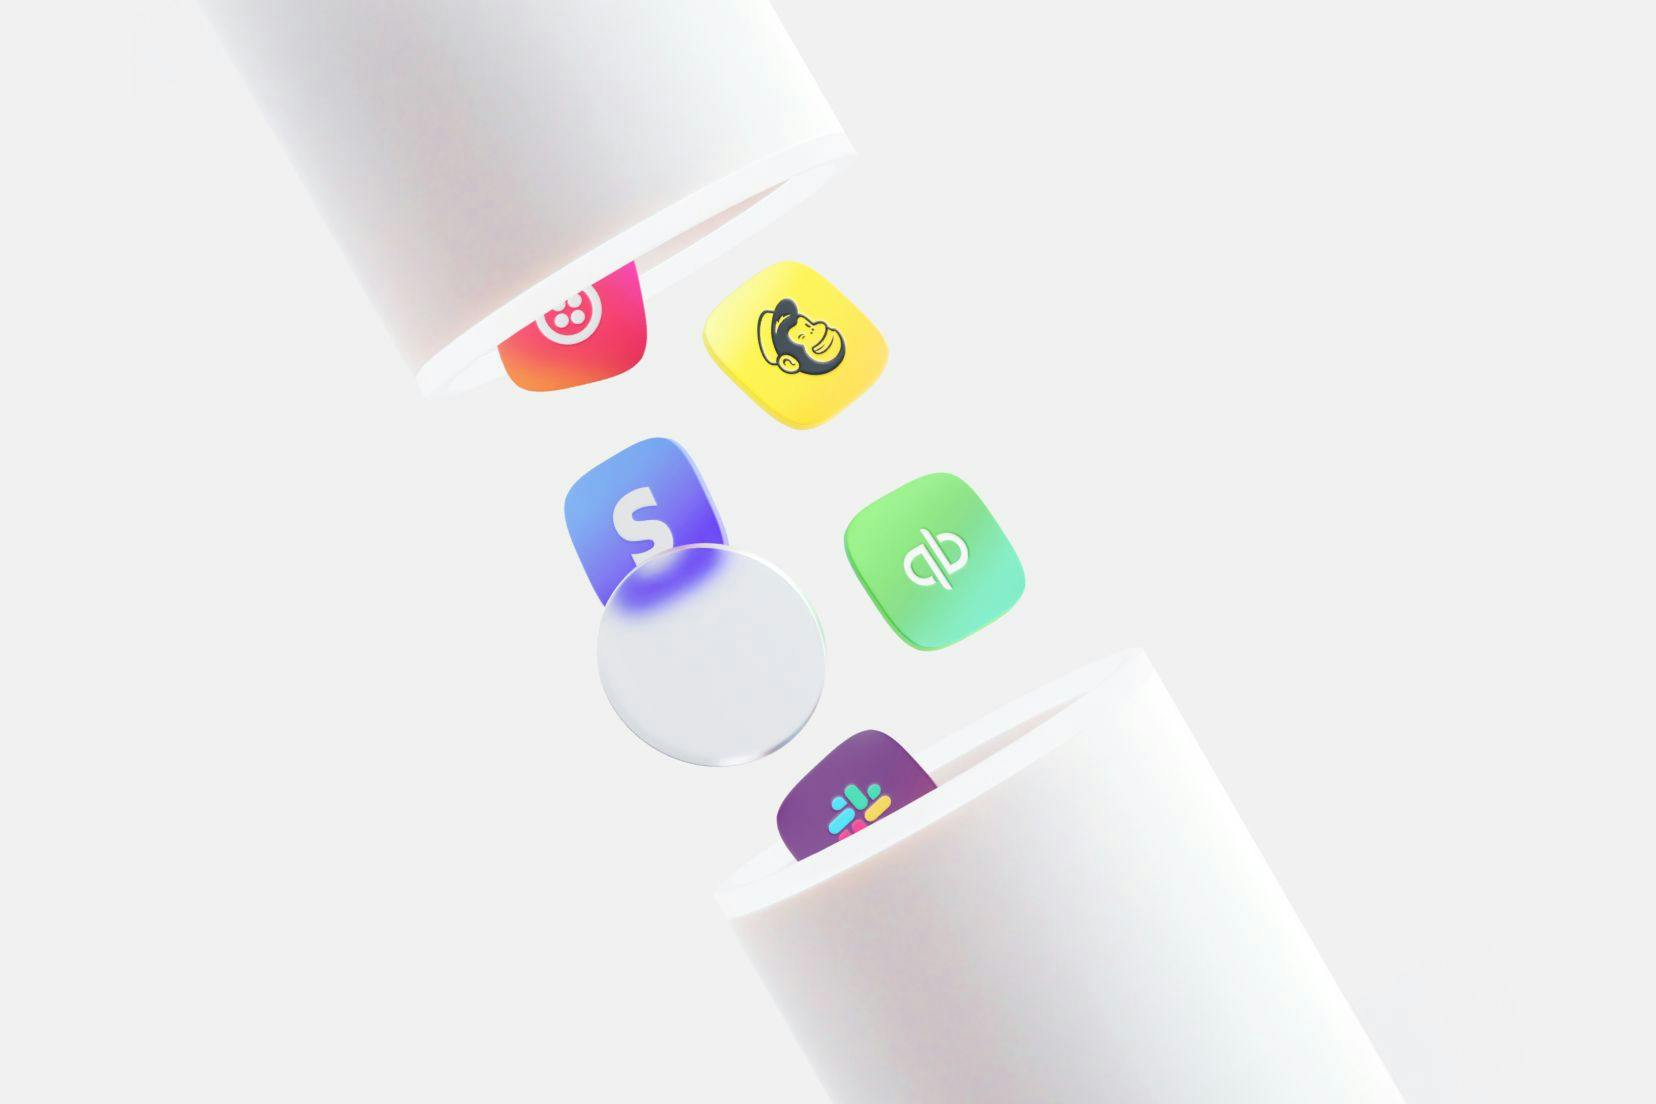 3D illustration with app icons moving through a pipe